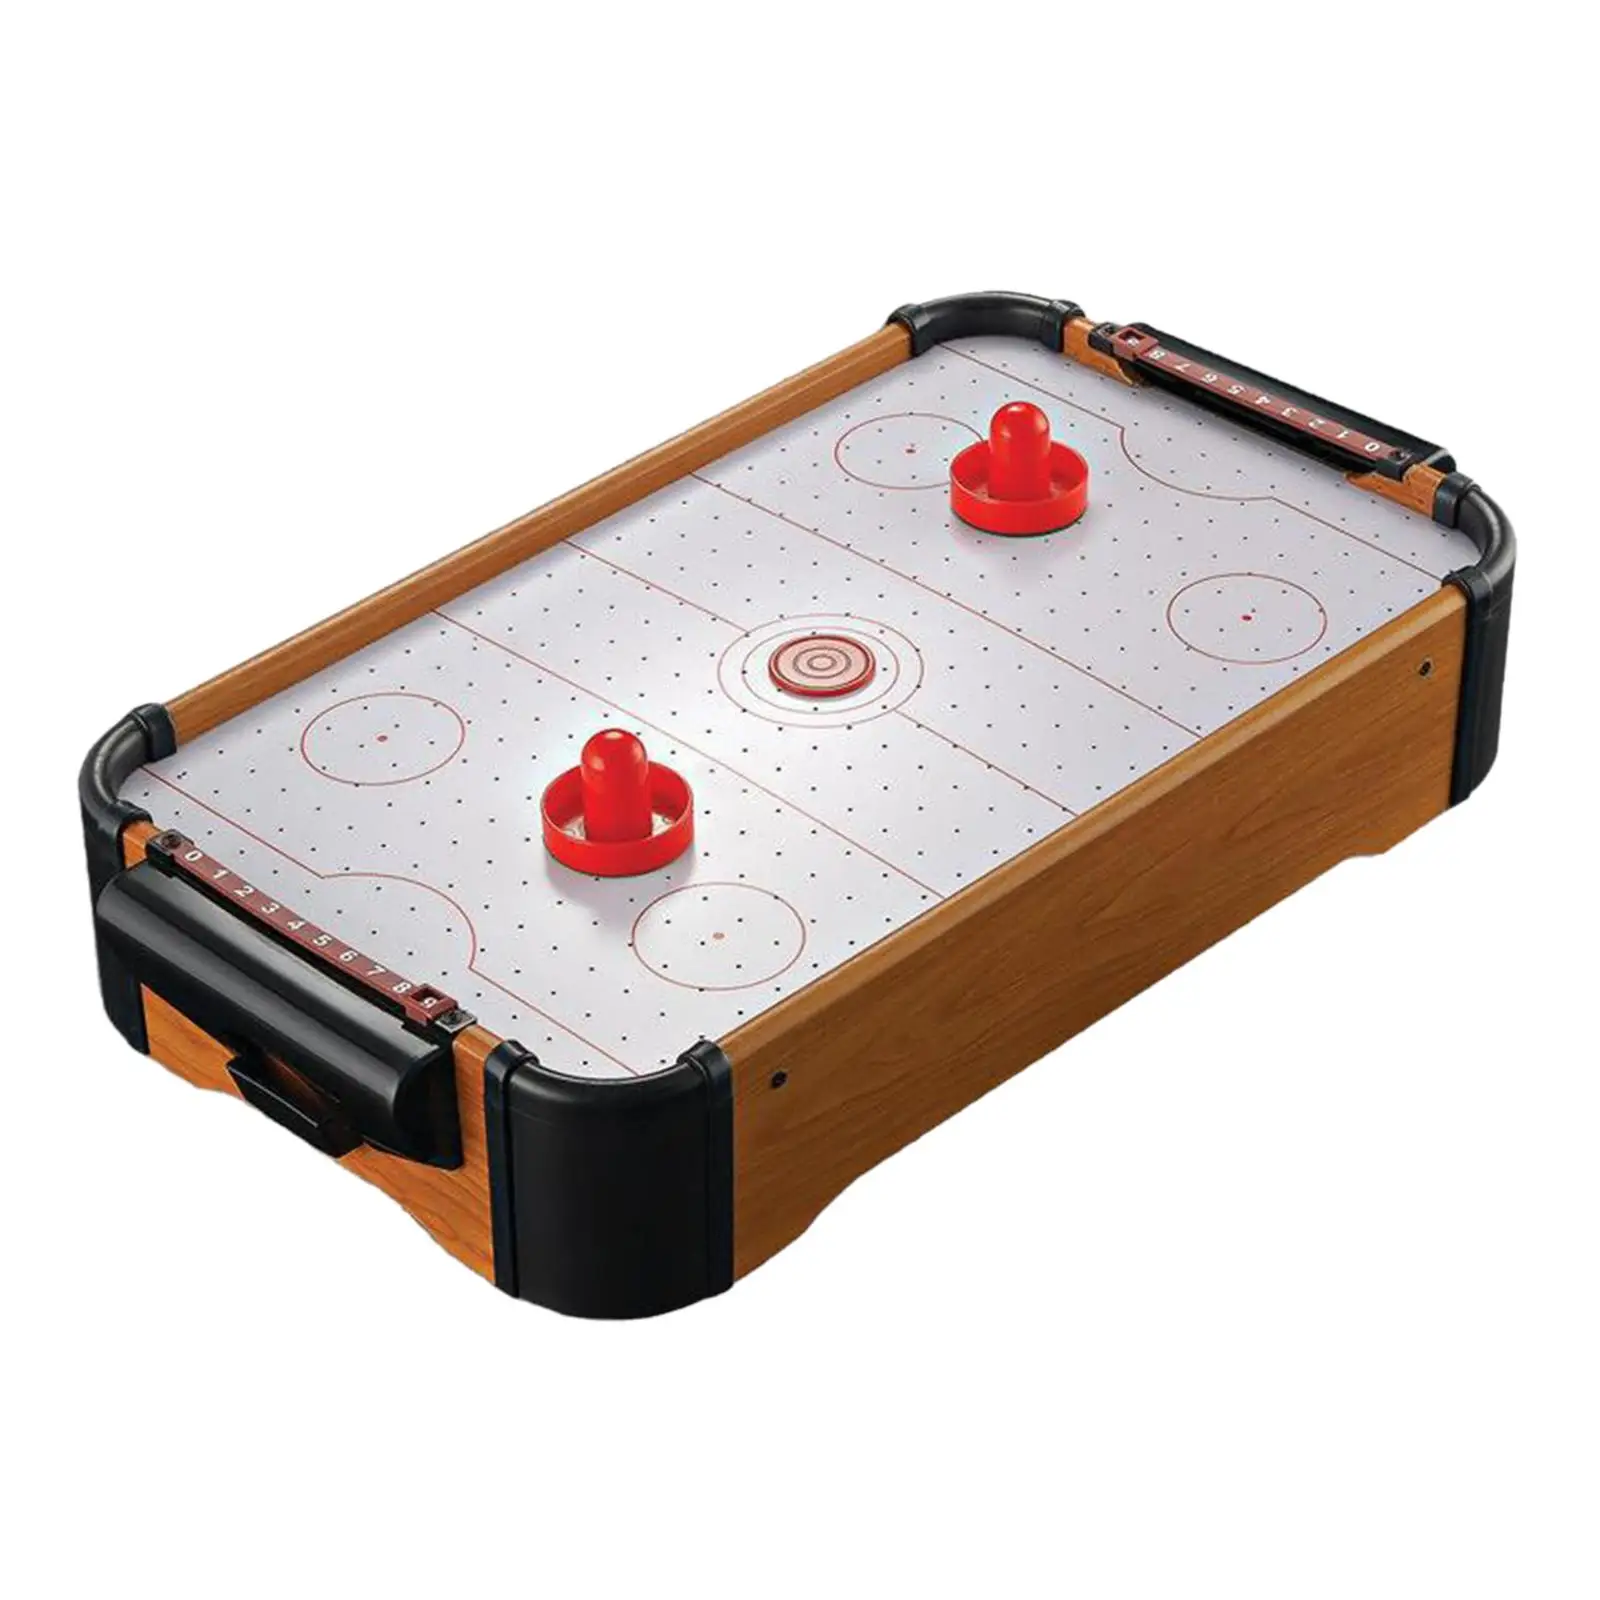 Wood Hockey Game Set Party Sport Game Entertainment Family games sports Play Football Board Tabletop Air Hockey for Child Adults